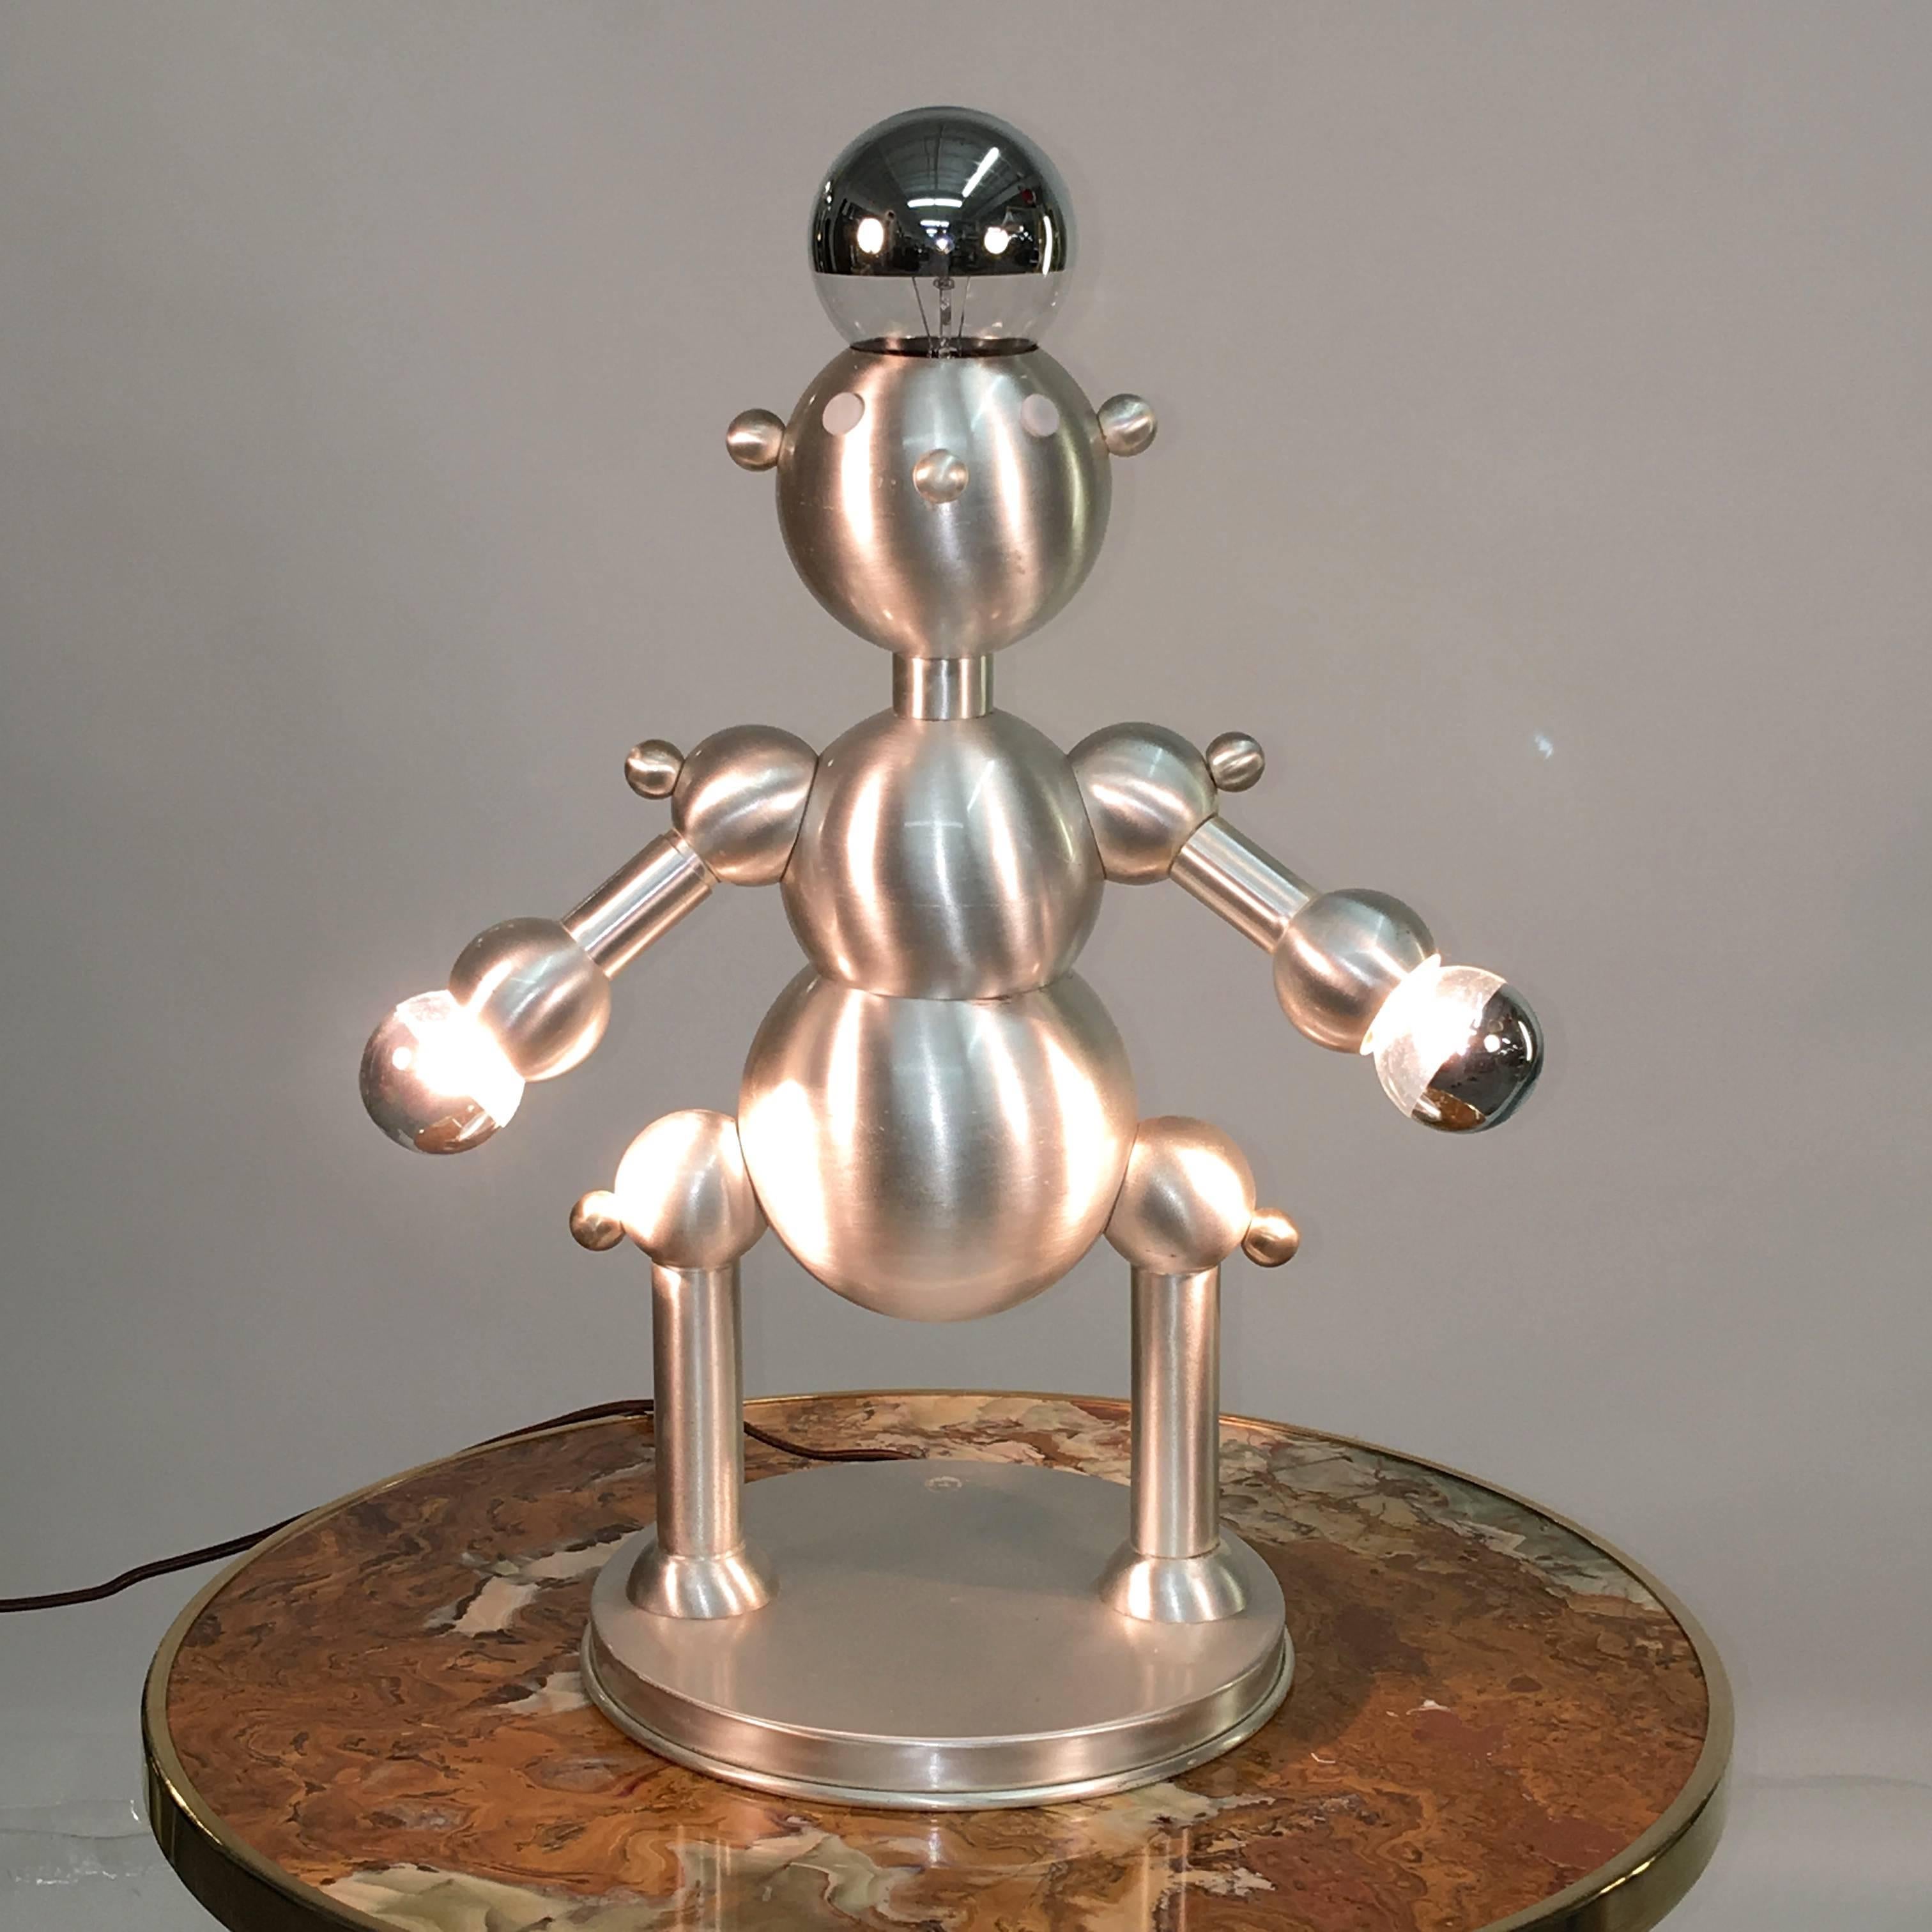 Contemporary Silver Plated Robot Lamp